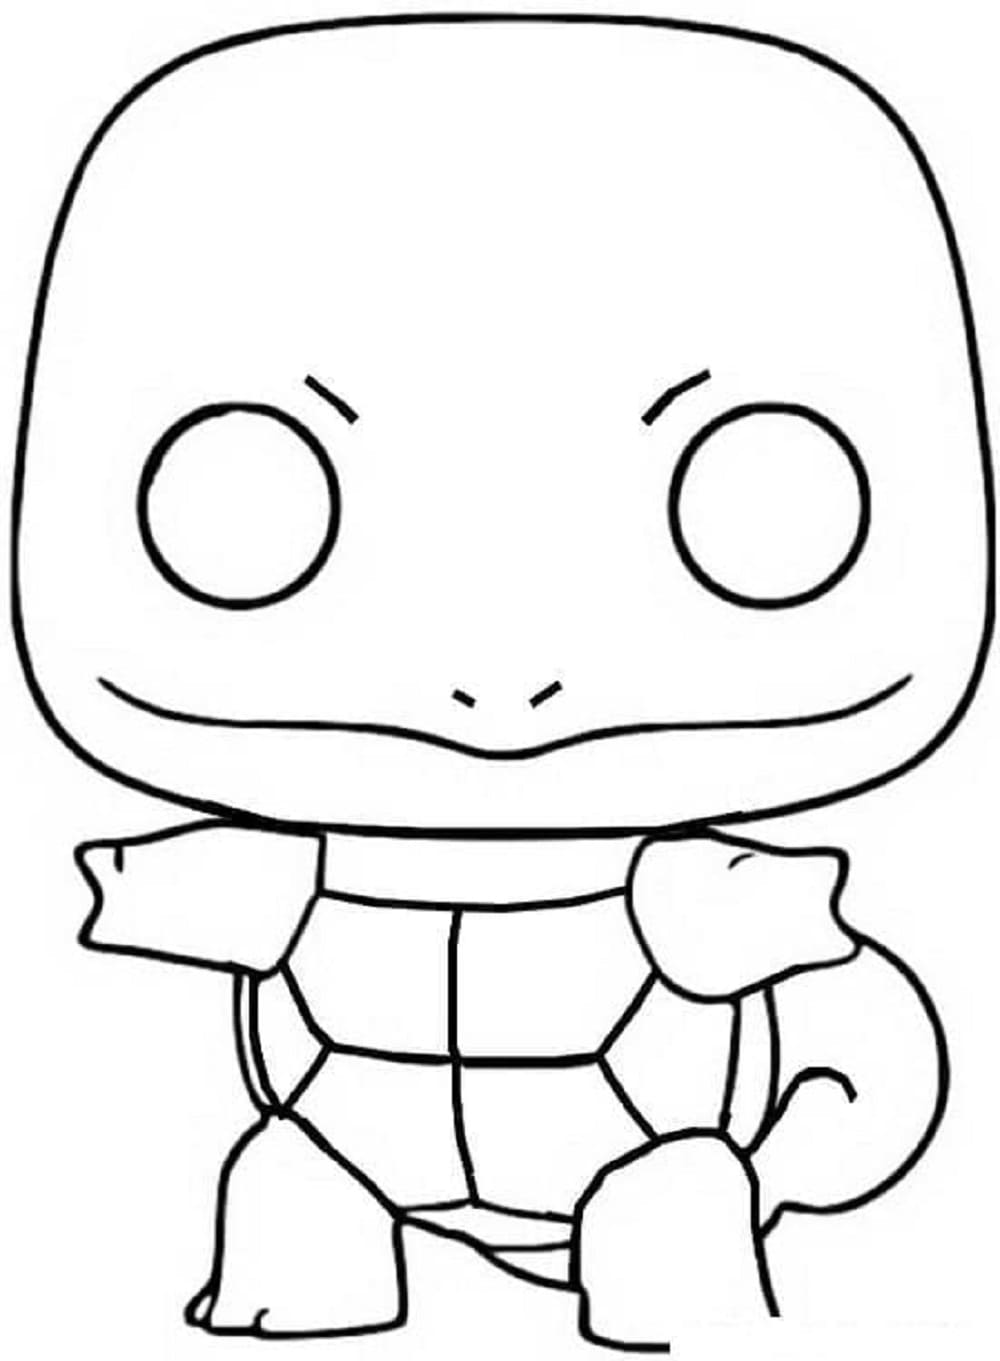 Printable Funko Pop Squirtle Coloring Page